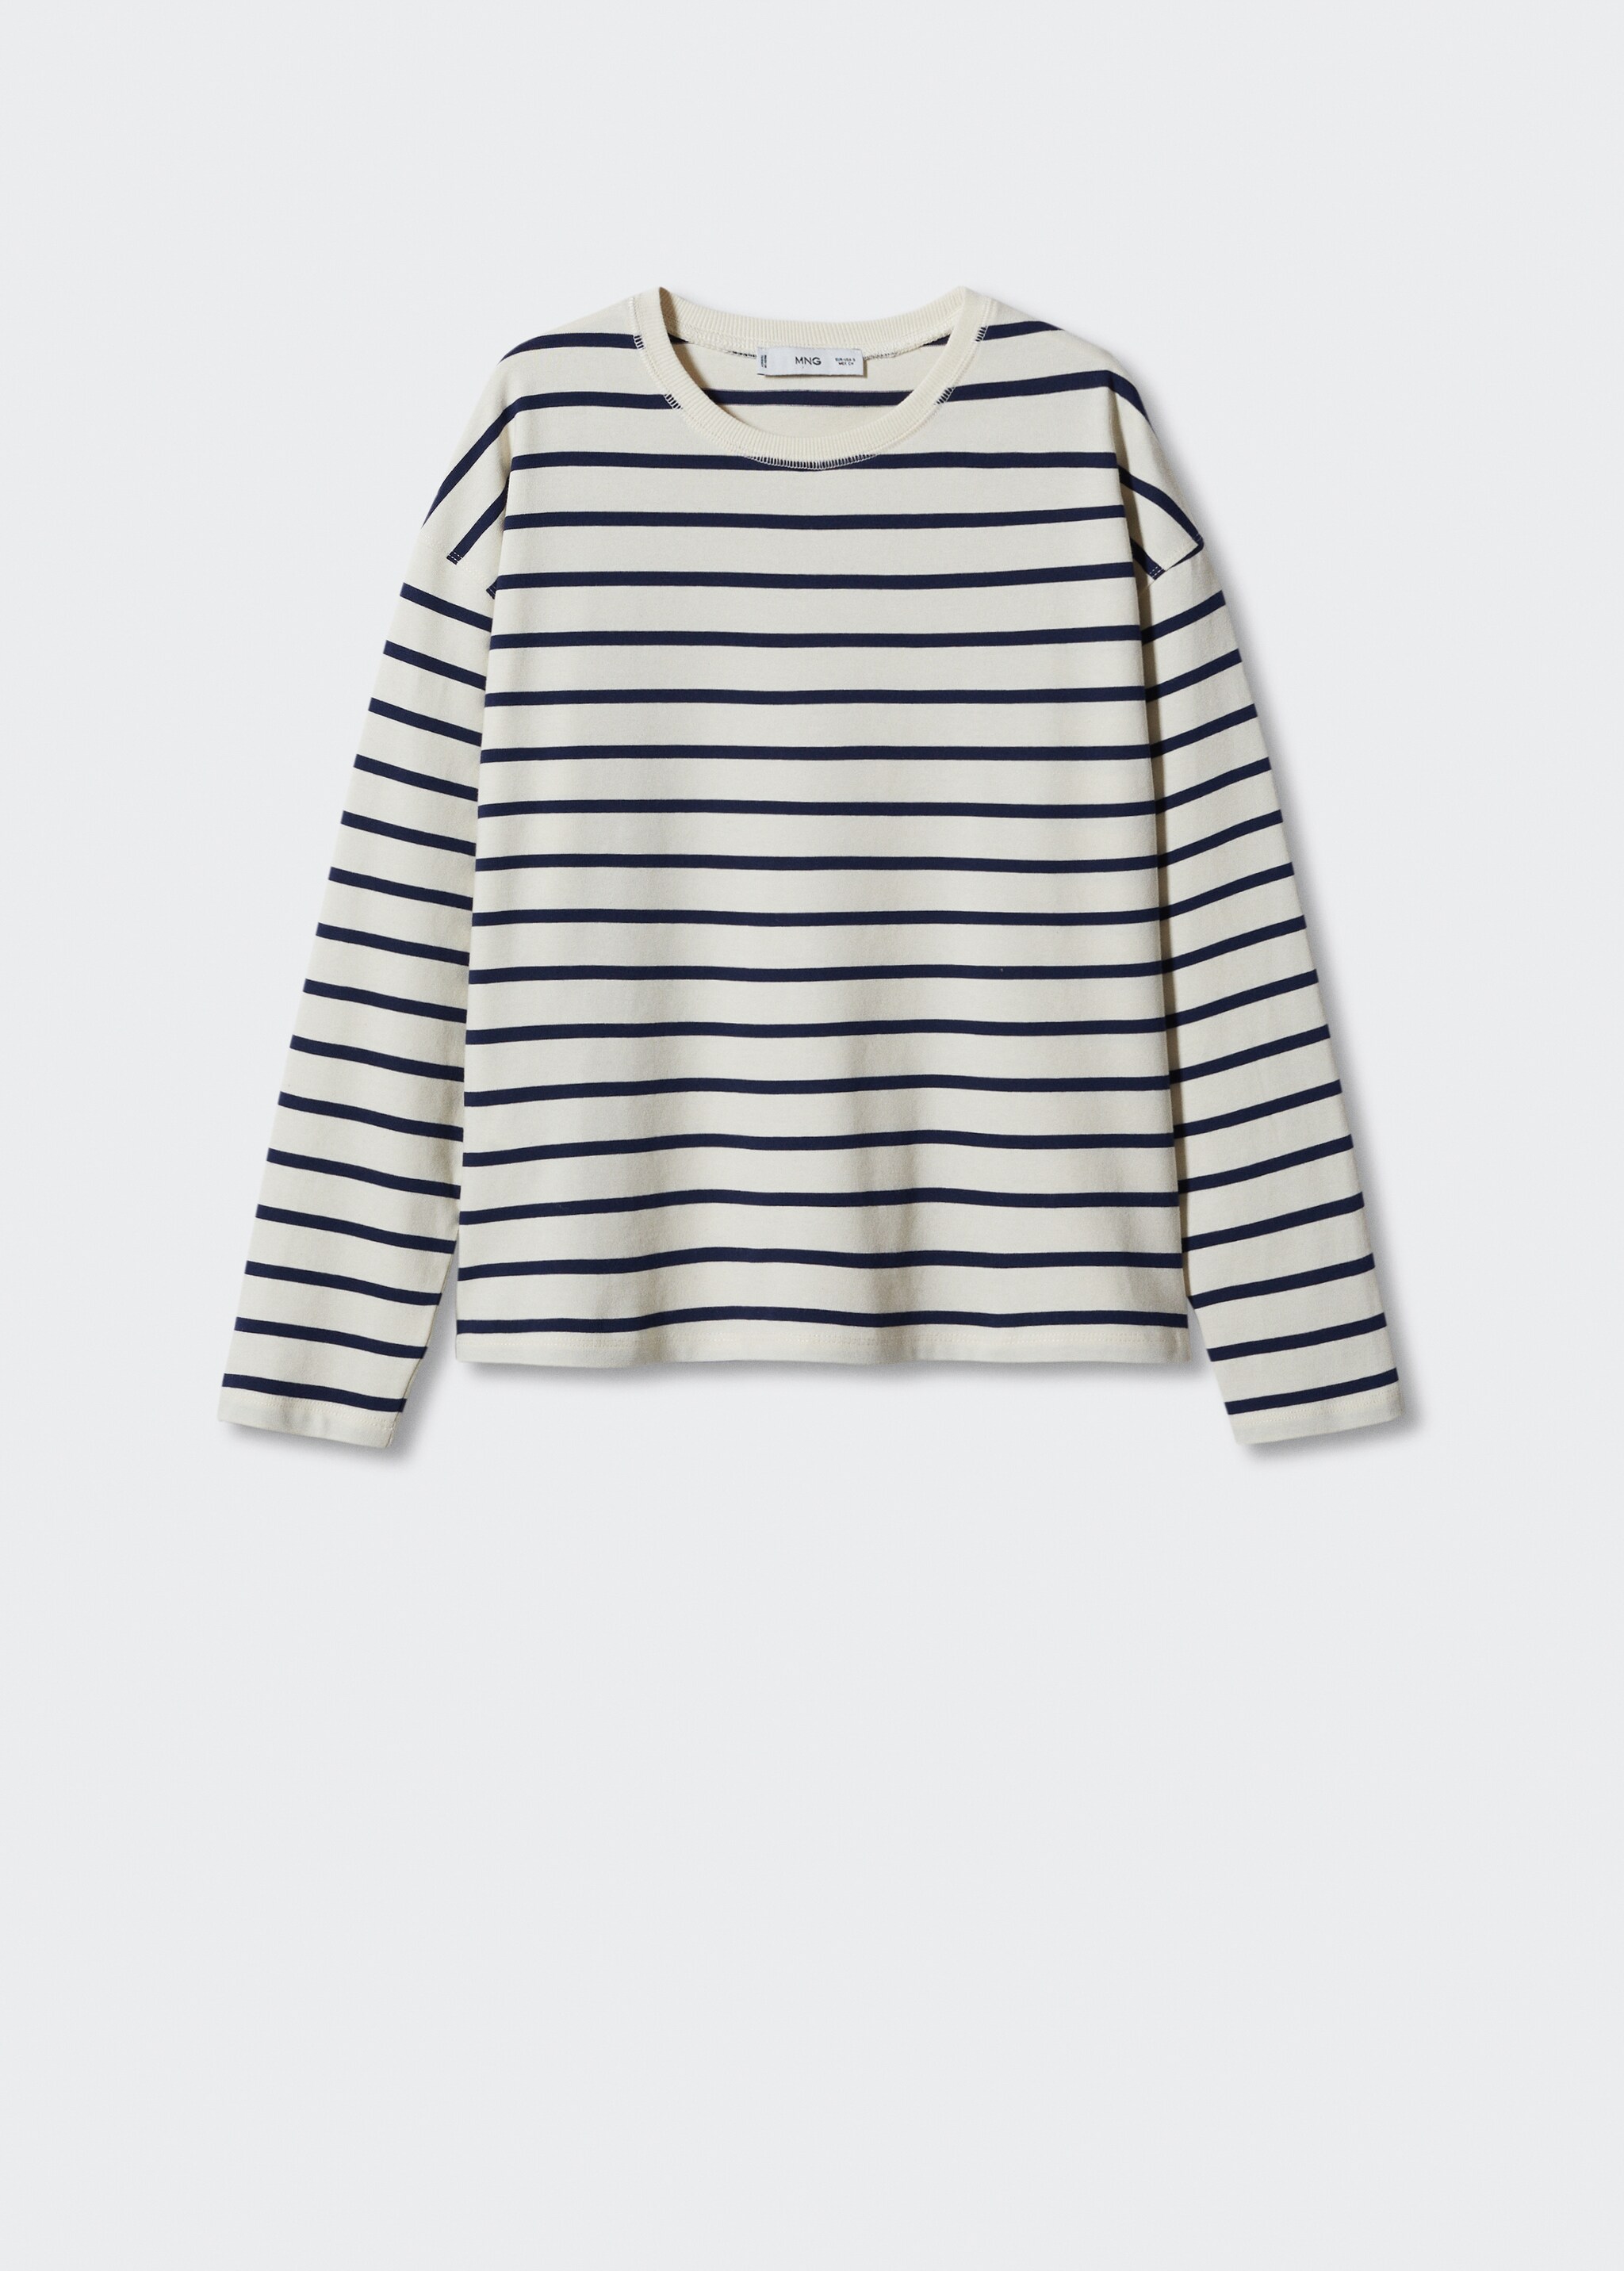 Striped cotton-blend sweatshirt - Article without model